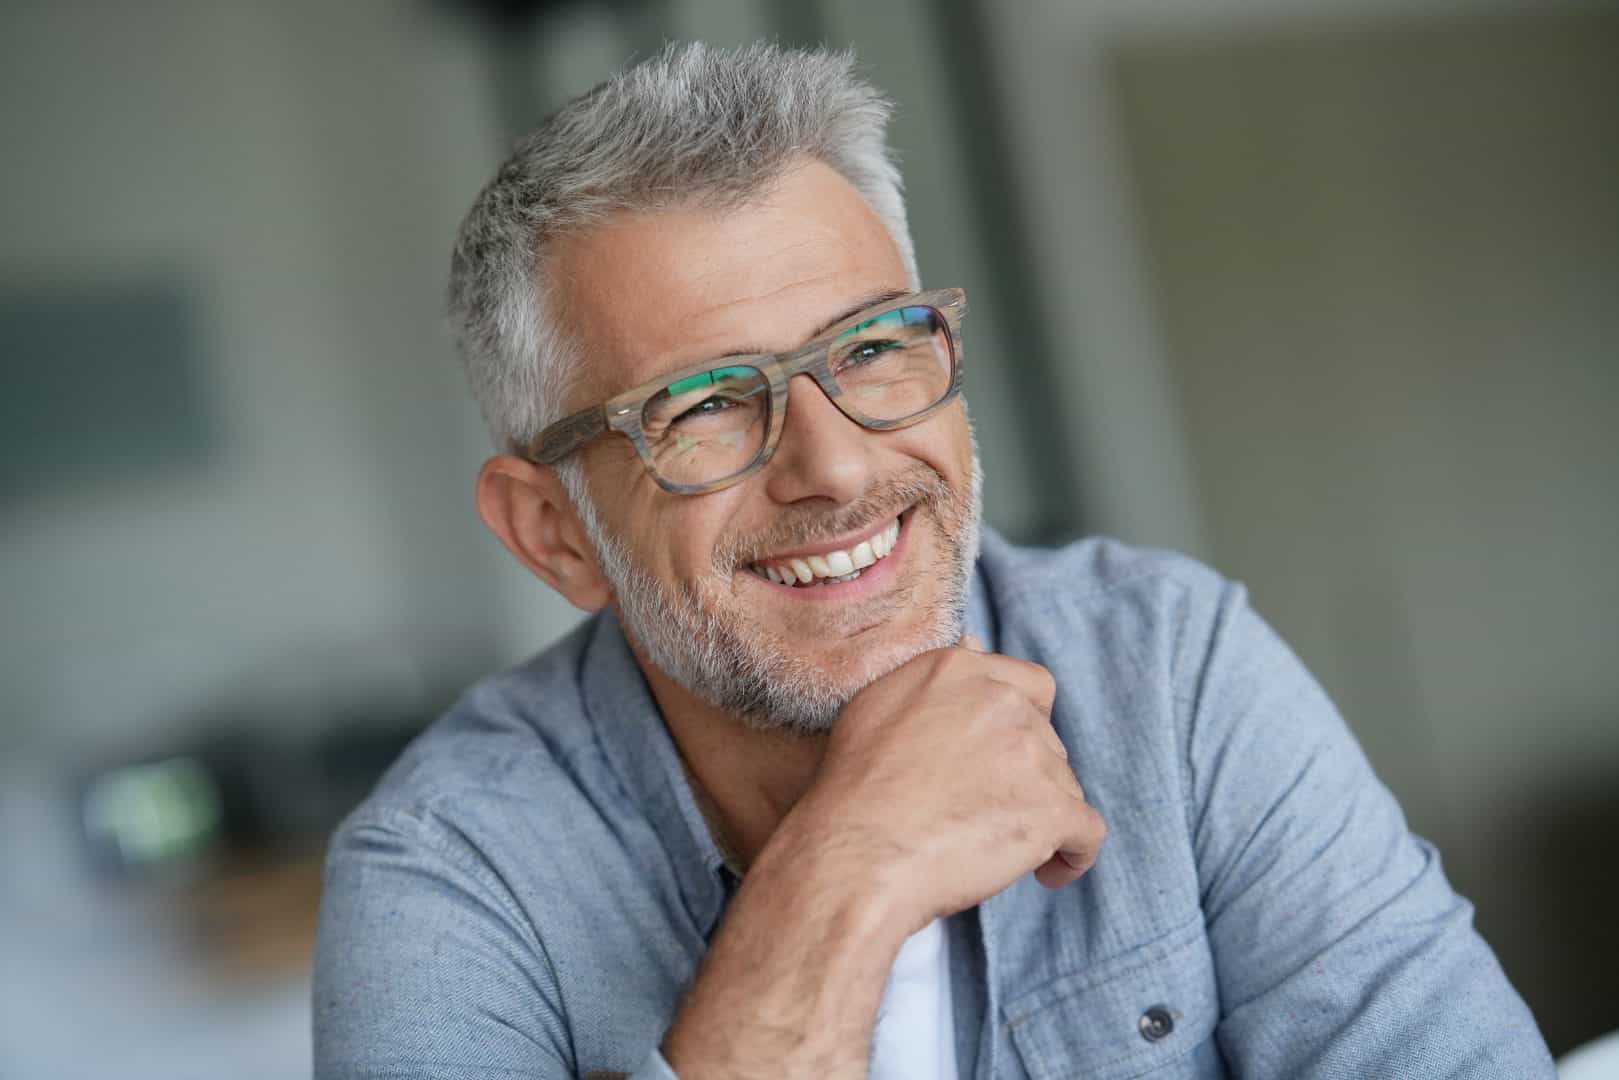 A middle aged man wearing glasses, smiling